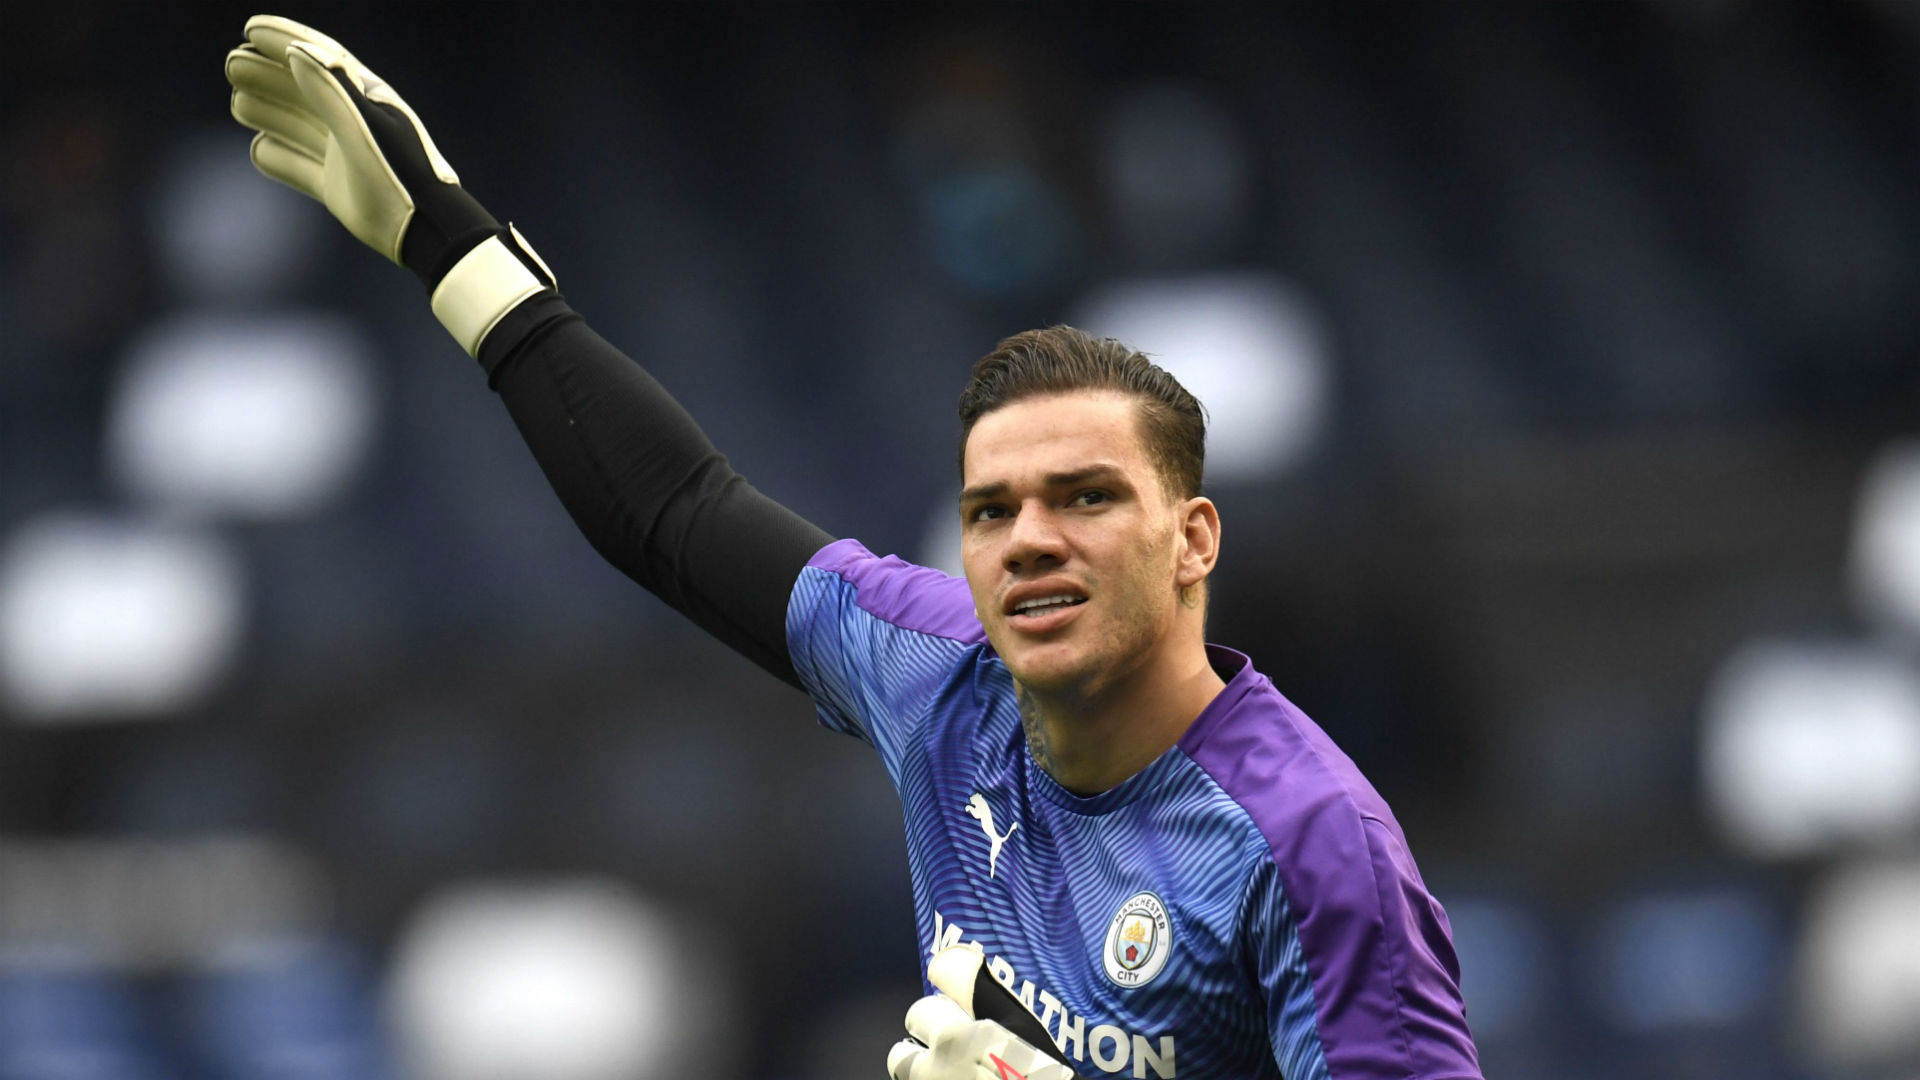 Ederson-Cropped (Getty Images)